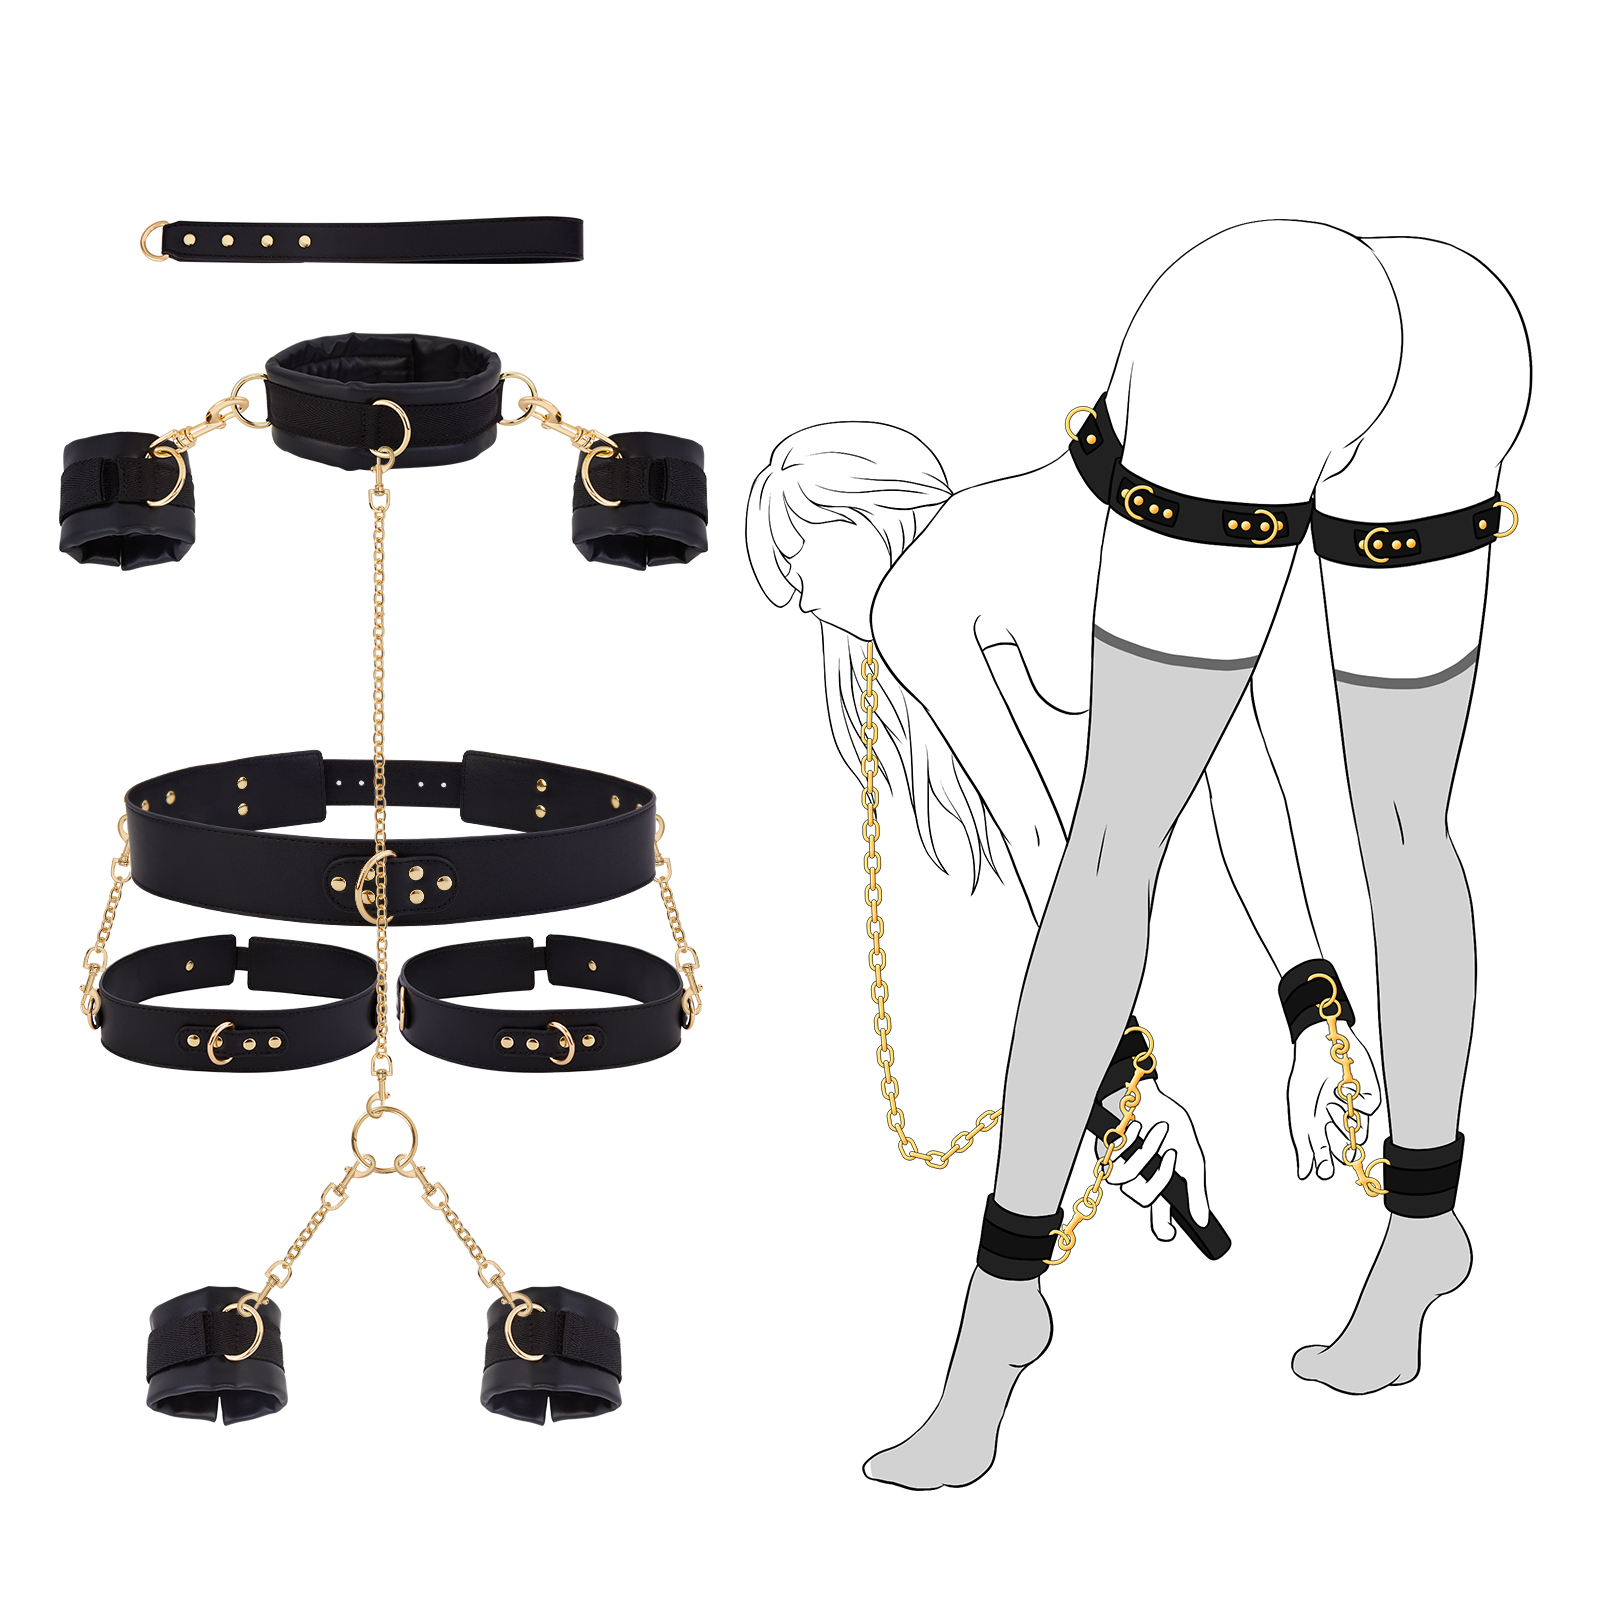 Sex Bondage BDSM Kit Restraints - UTIMI Adult Sex Toys for Couples Neck to Wrist SM Gear & Accessories Game 7PCS Sets with Adjustable Handcuffs Ankle Thigh Cuff Cross Waist Strap Traction Chain Collar